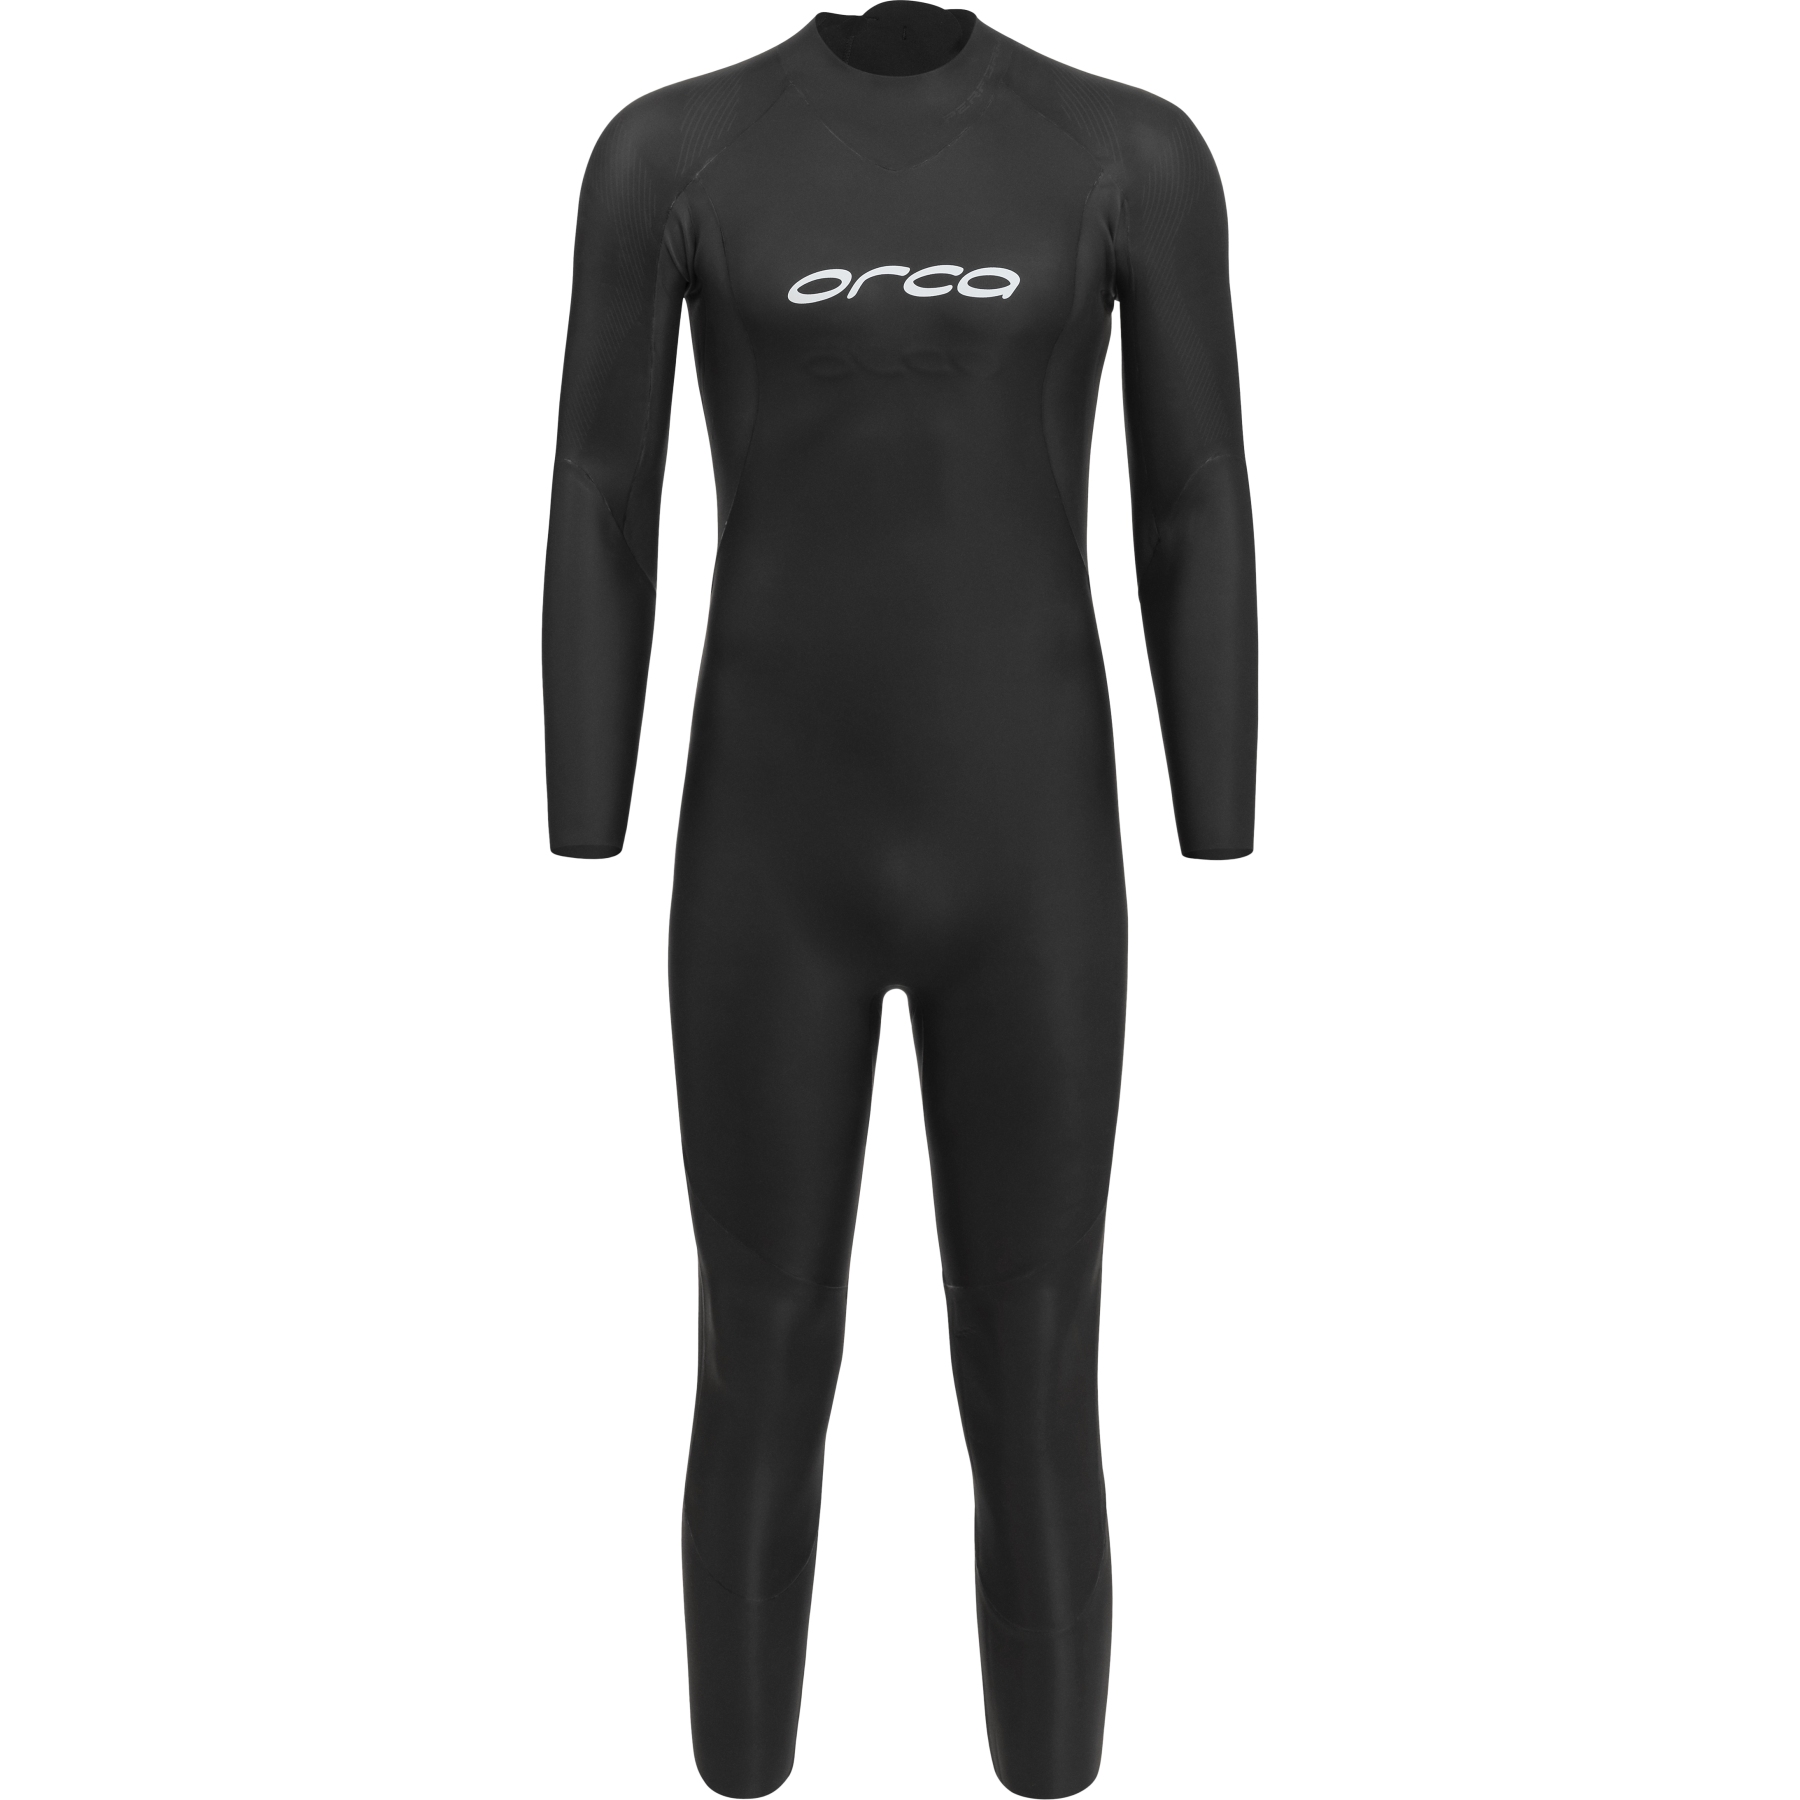 Picture of Orca Openwater Perform FINA Wetsuit Men - black